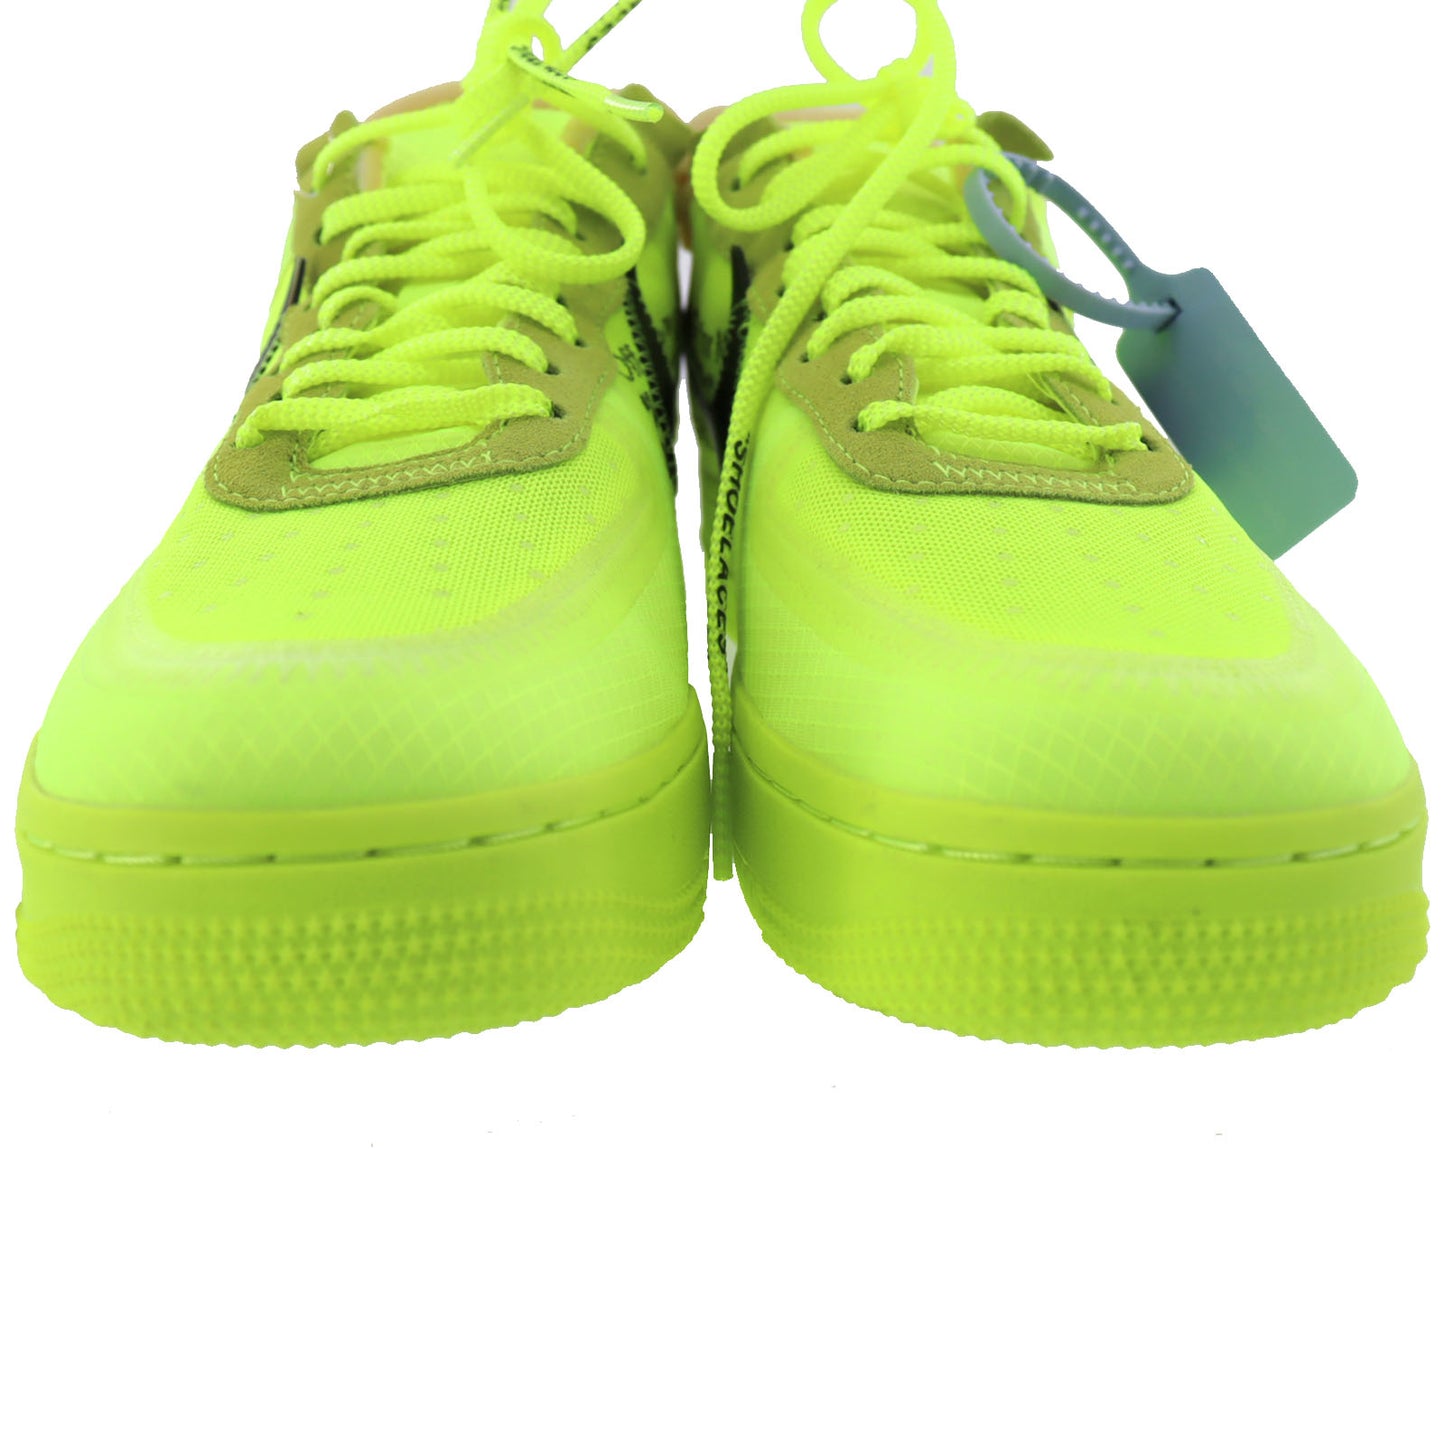 Nike Air Force 1 Low Lace Up Shoes Sneakers Volt Size 10 Fluorescent Green AE997